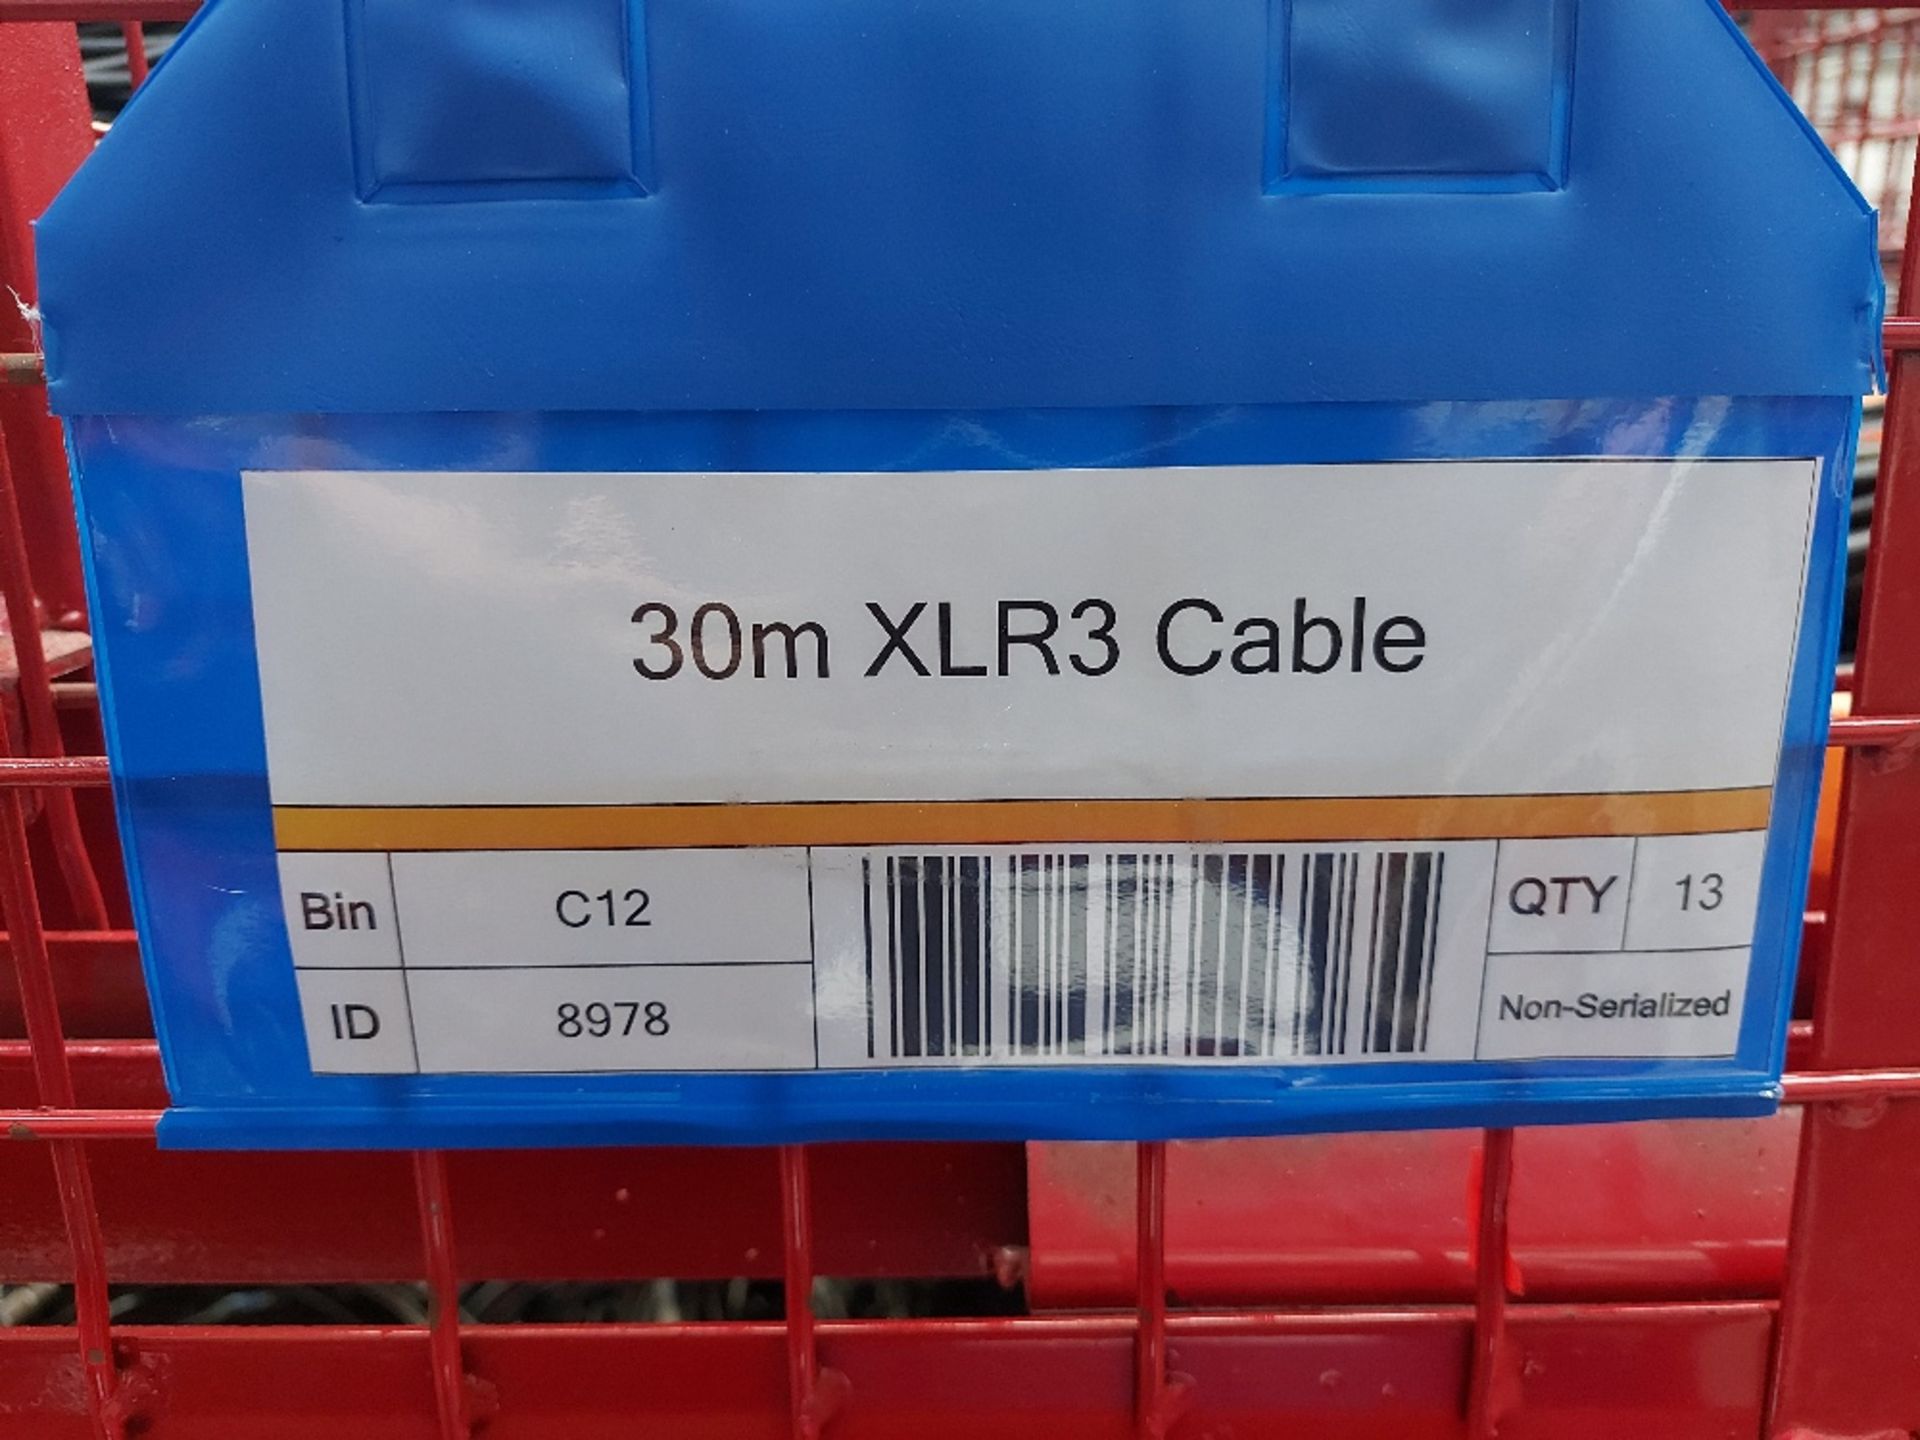 Large Quantity of 50m XLR3 Cable & Large Quantity 30M XLR3 Cable with Steel Fabricated Stillage - Image 5 of 5